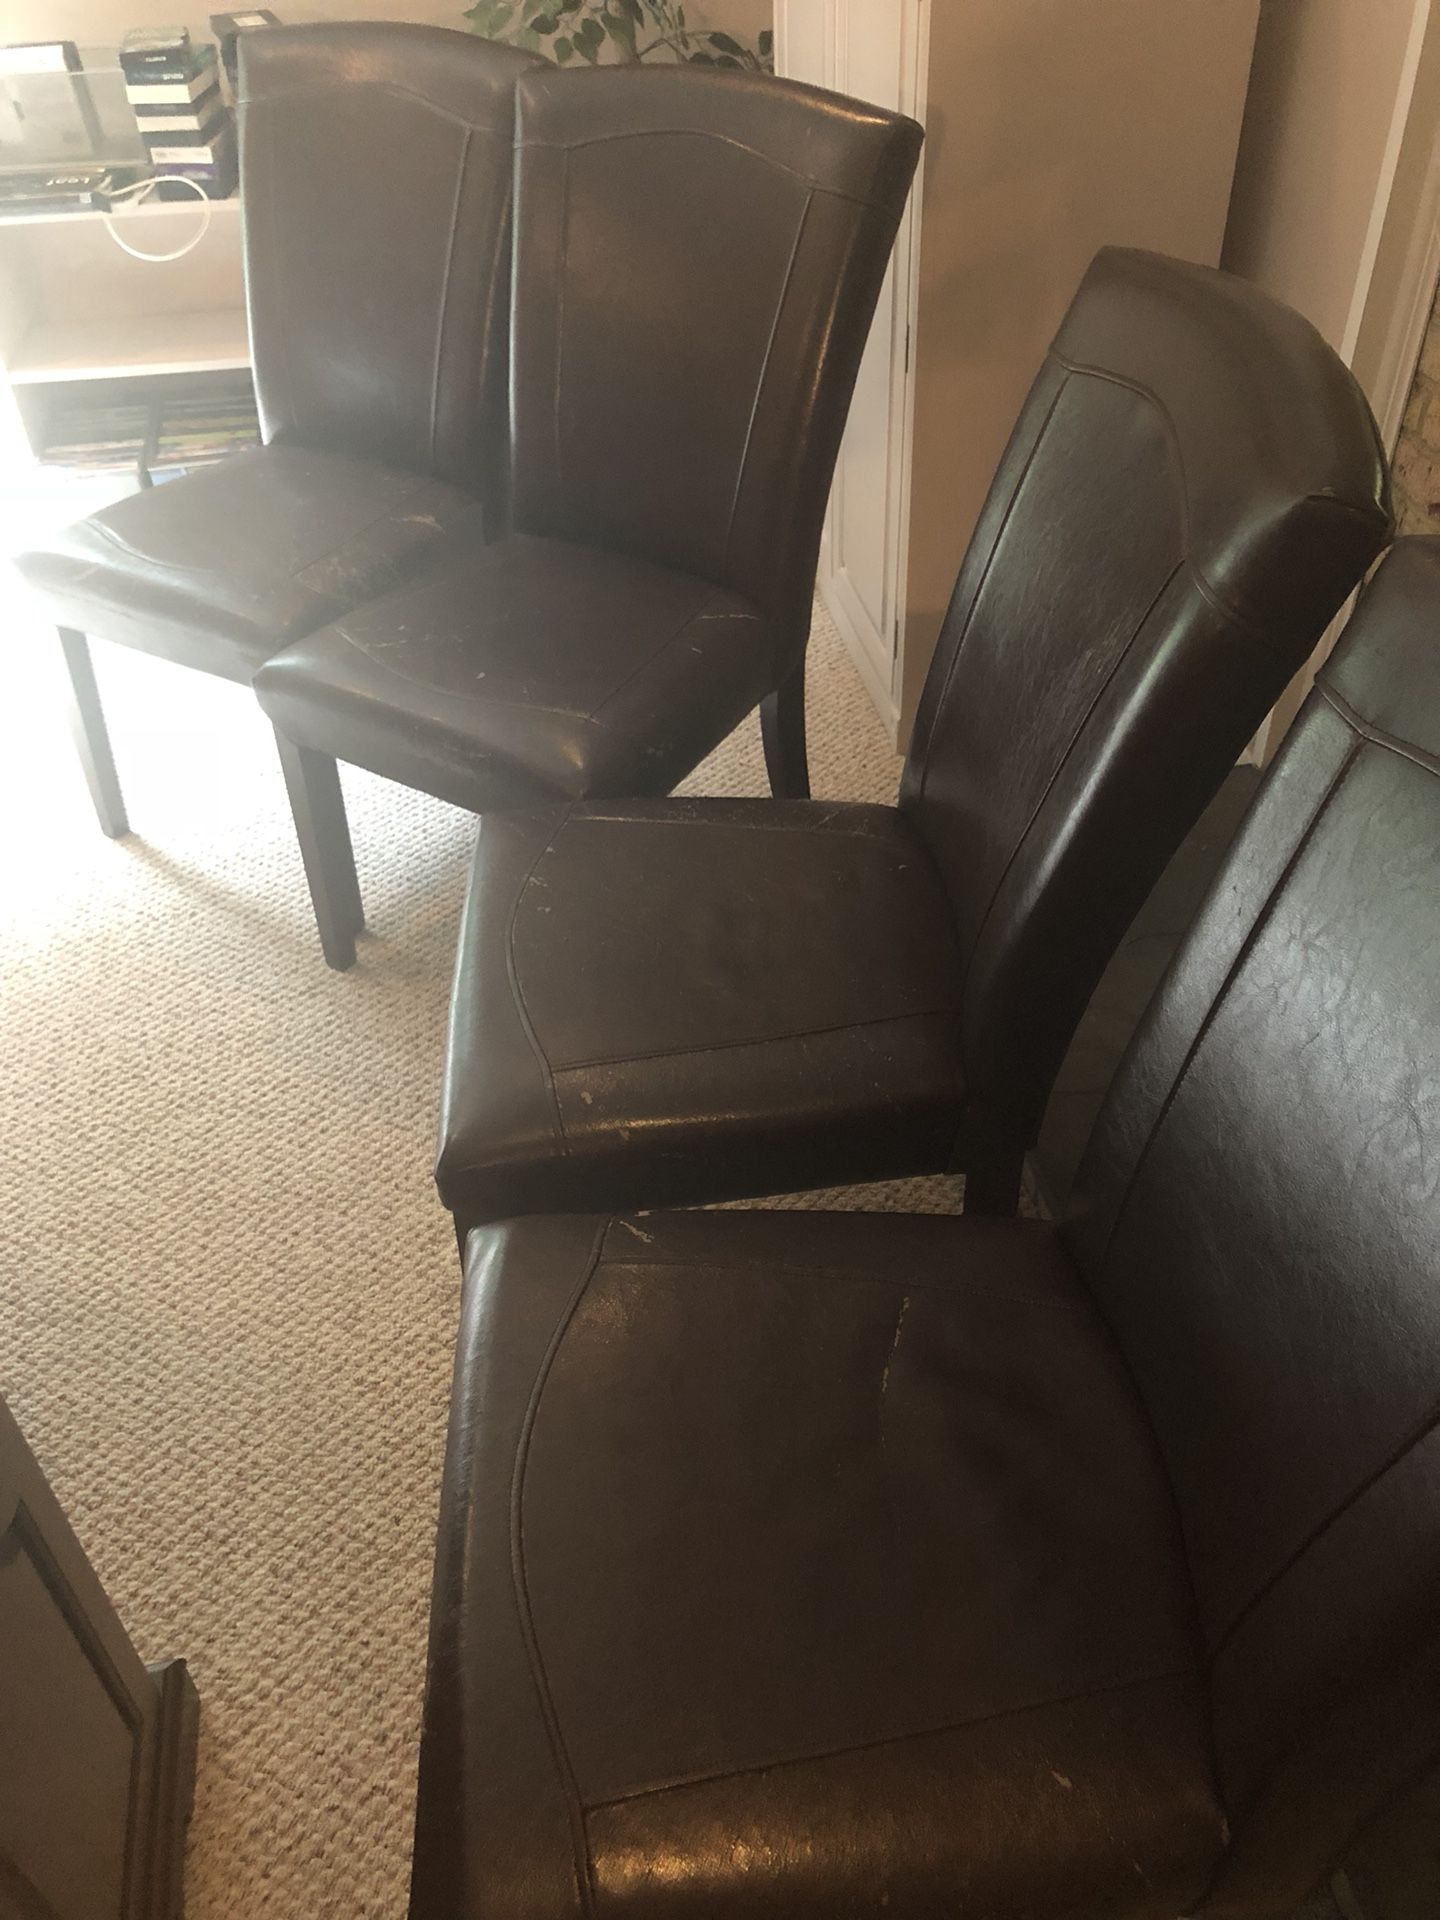 4 leather dining chairs